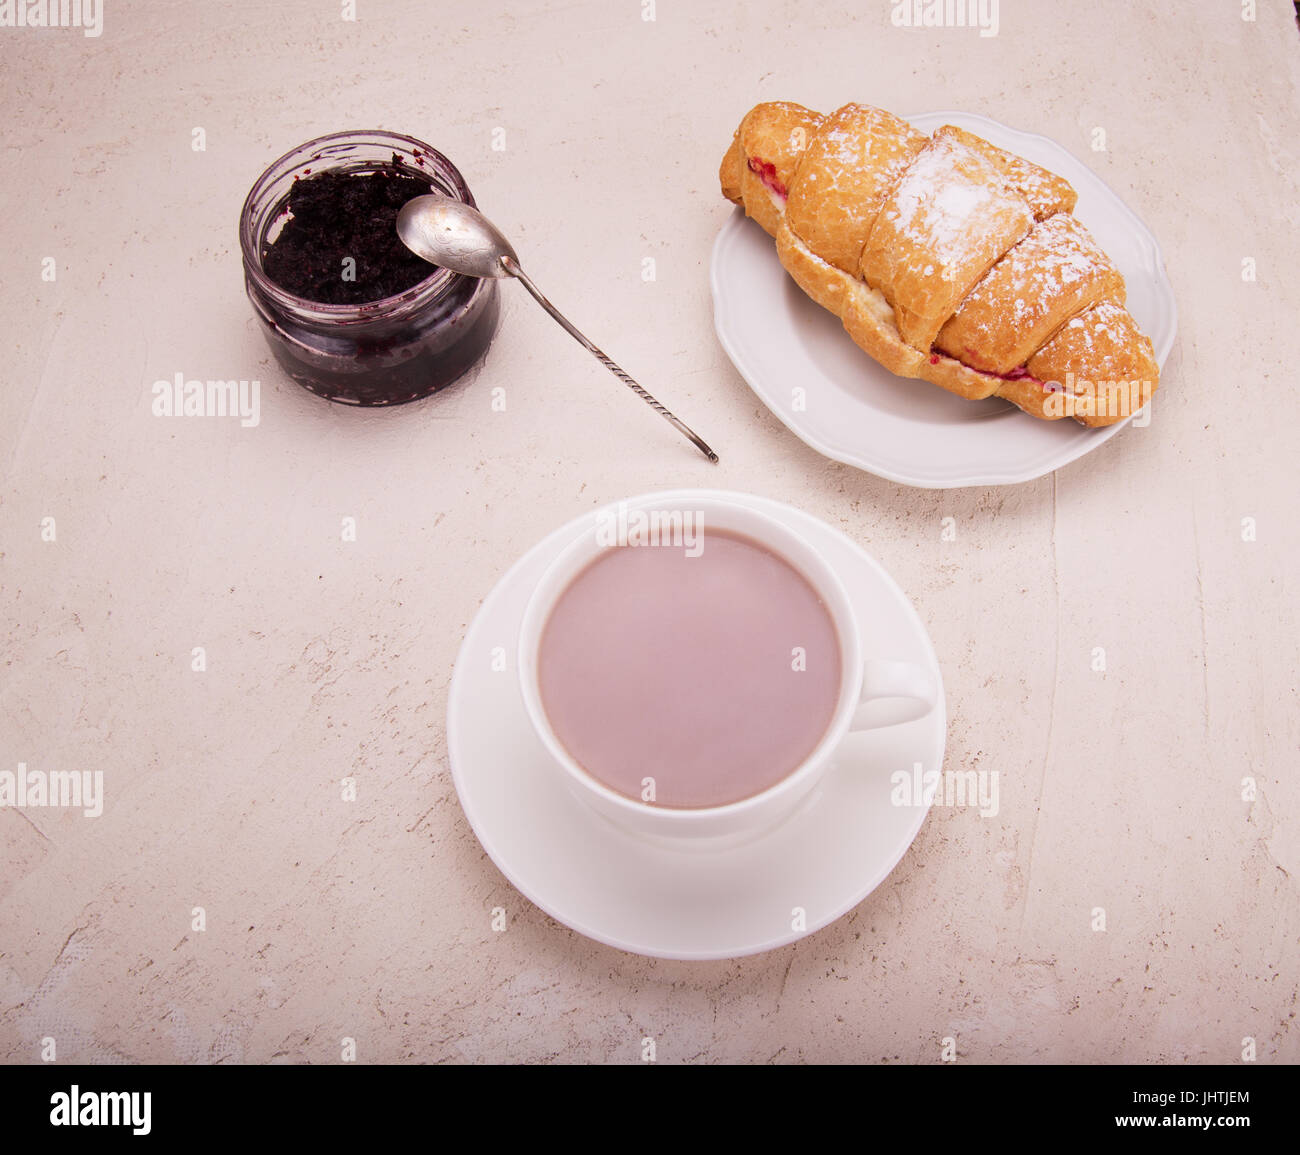 Croissant with raspberry jam, on the table a mobile phone and cocoa in a mug. The concept of business breakfast. Stock Photo